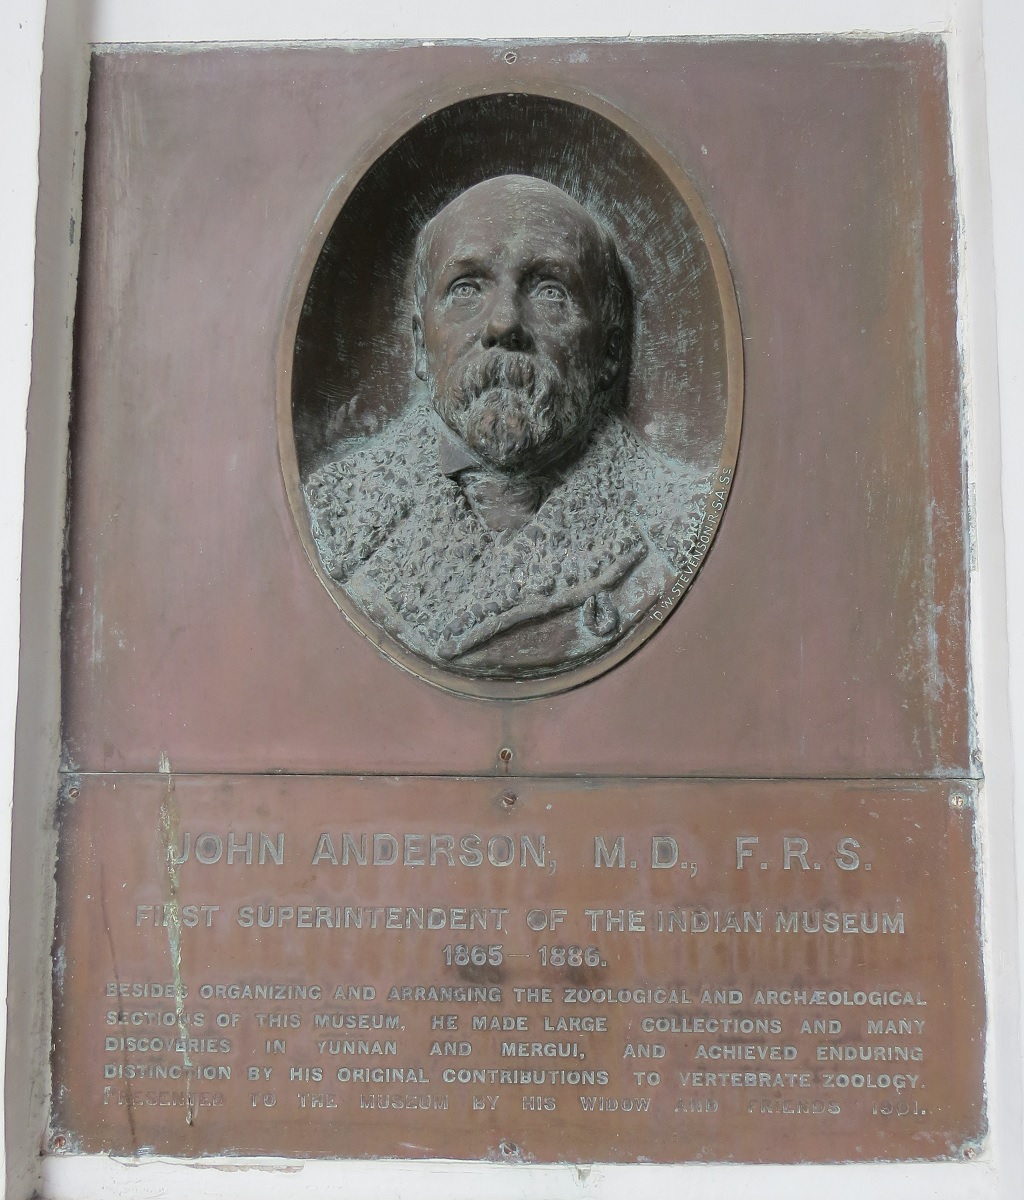 John Anderson – First Superintendent of The Indian Museum